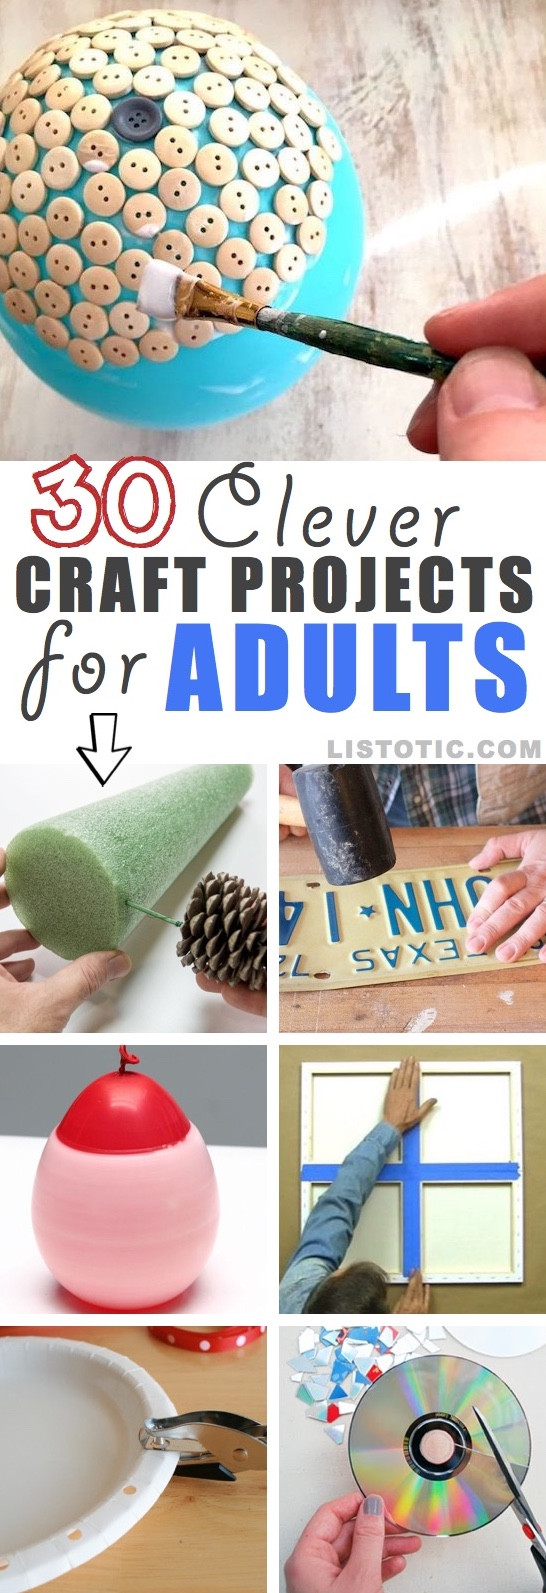 Easy Adult Crafts
 Easy DIY Craft Ideas That Will Spark Your Creativity for